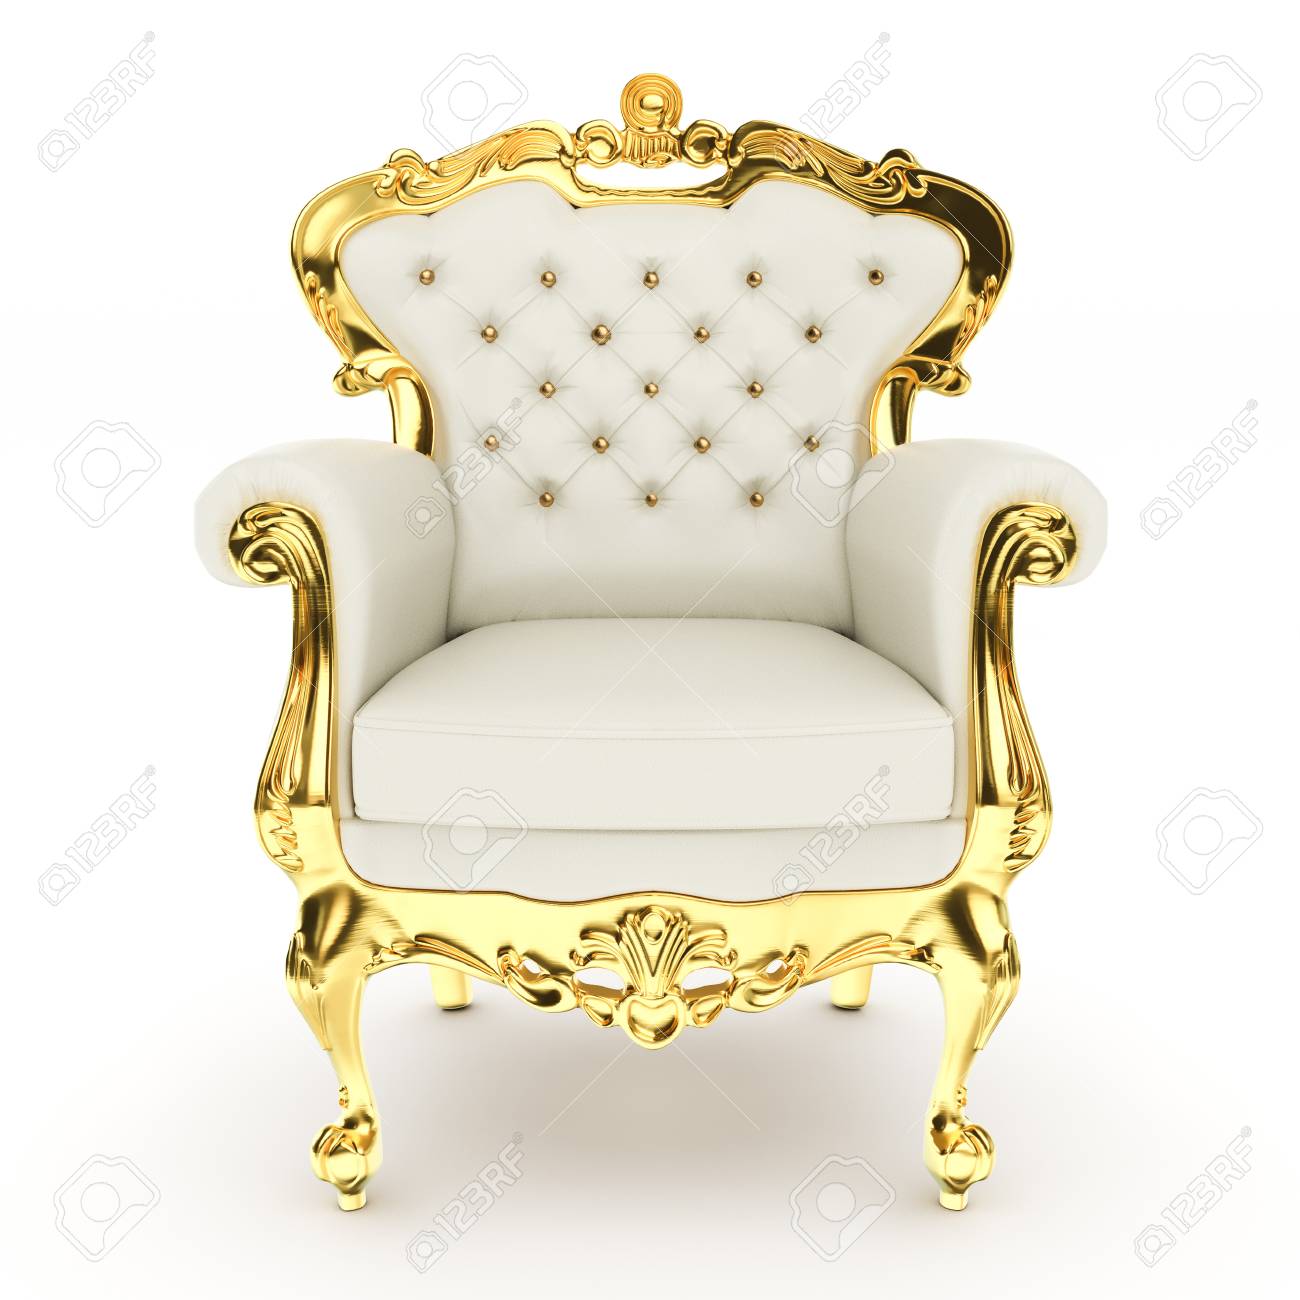 3d Kings Throne Royal Chair On White Background 3d Illustration